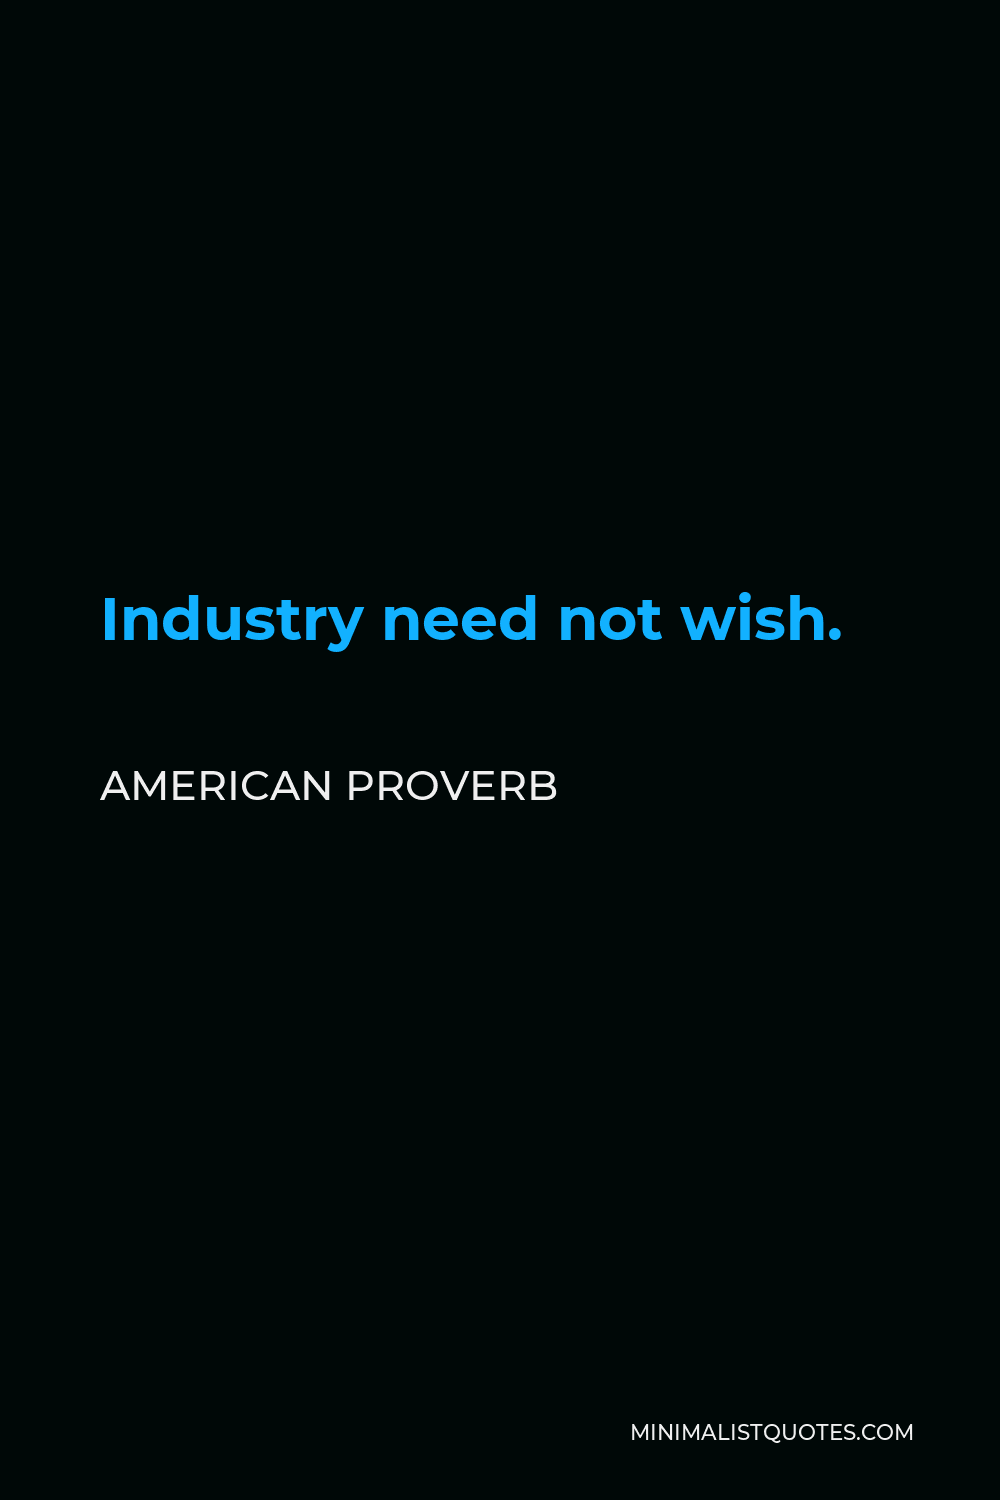 American Proverb Quote - Industry need not wish.